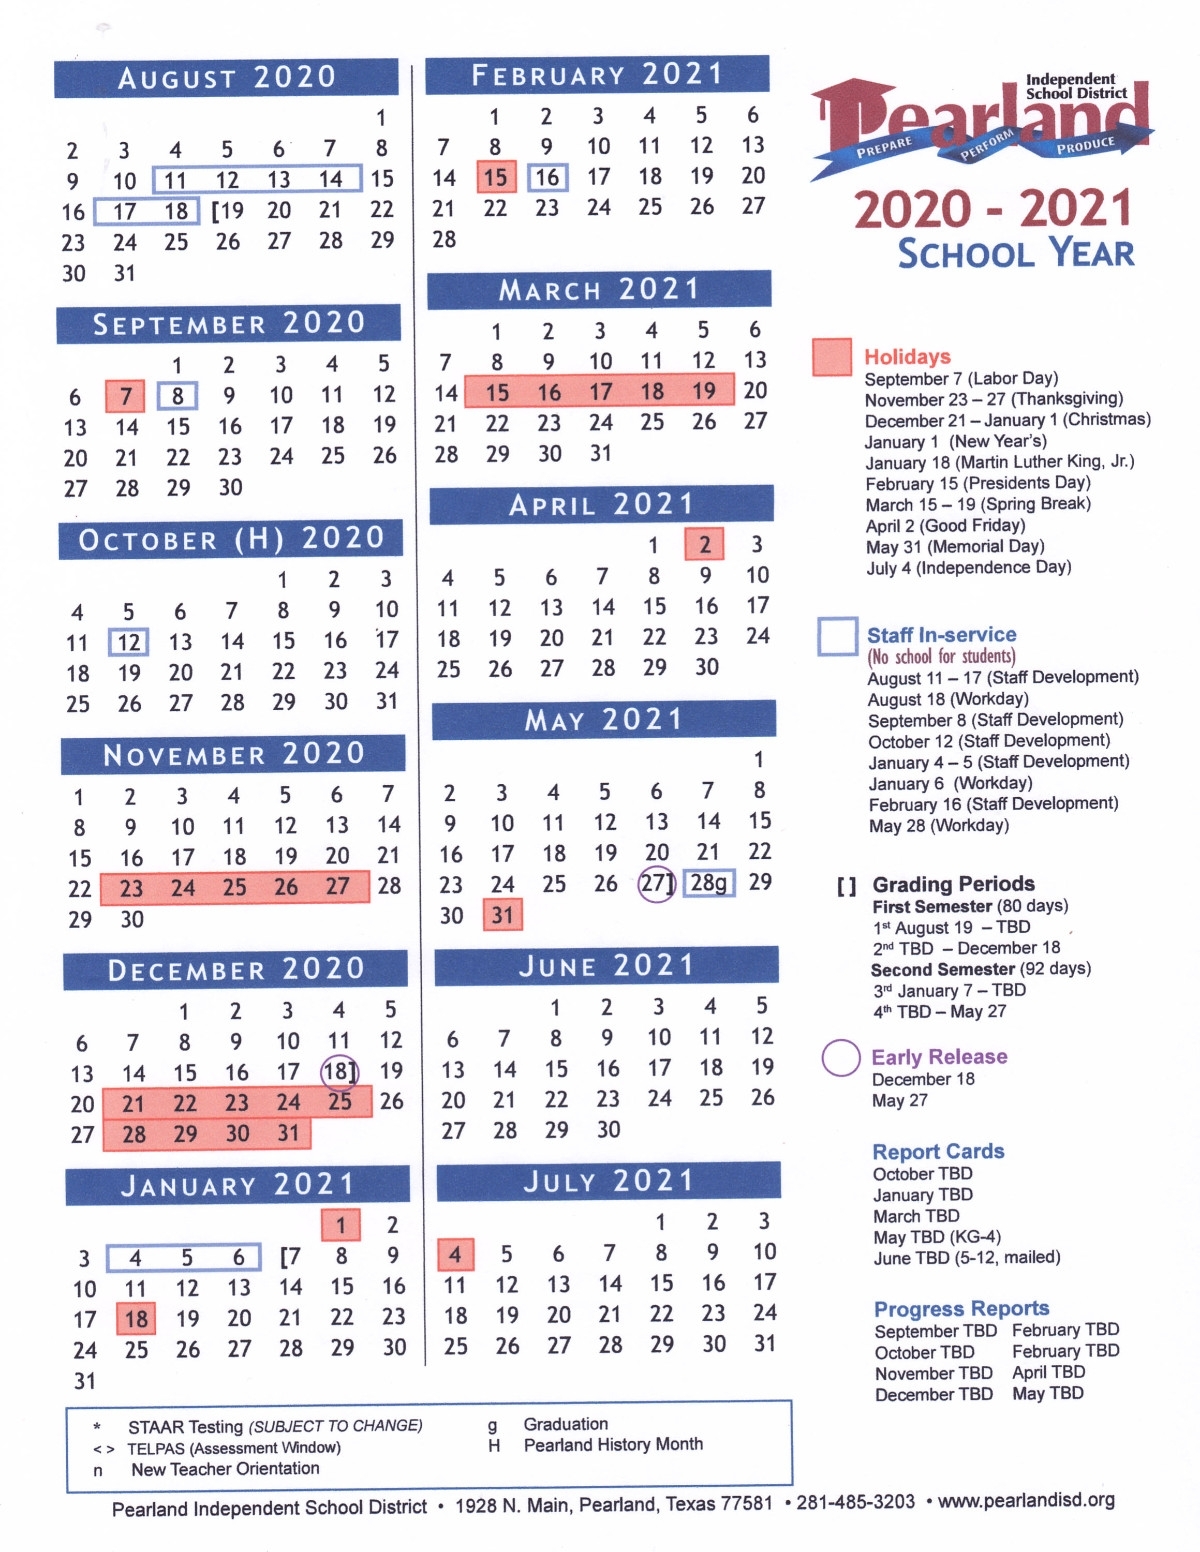 Pearland Isd 2020/2021 Calendar Has Been Approved